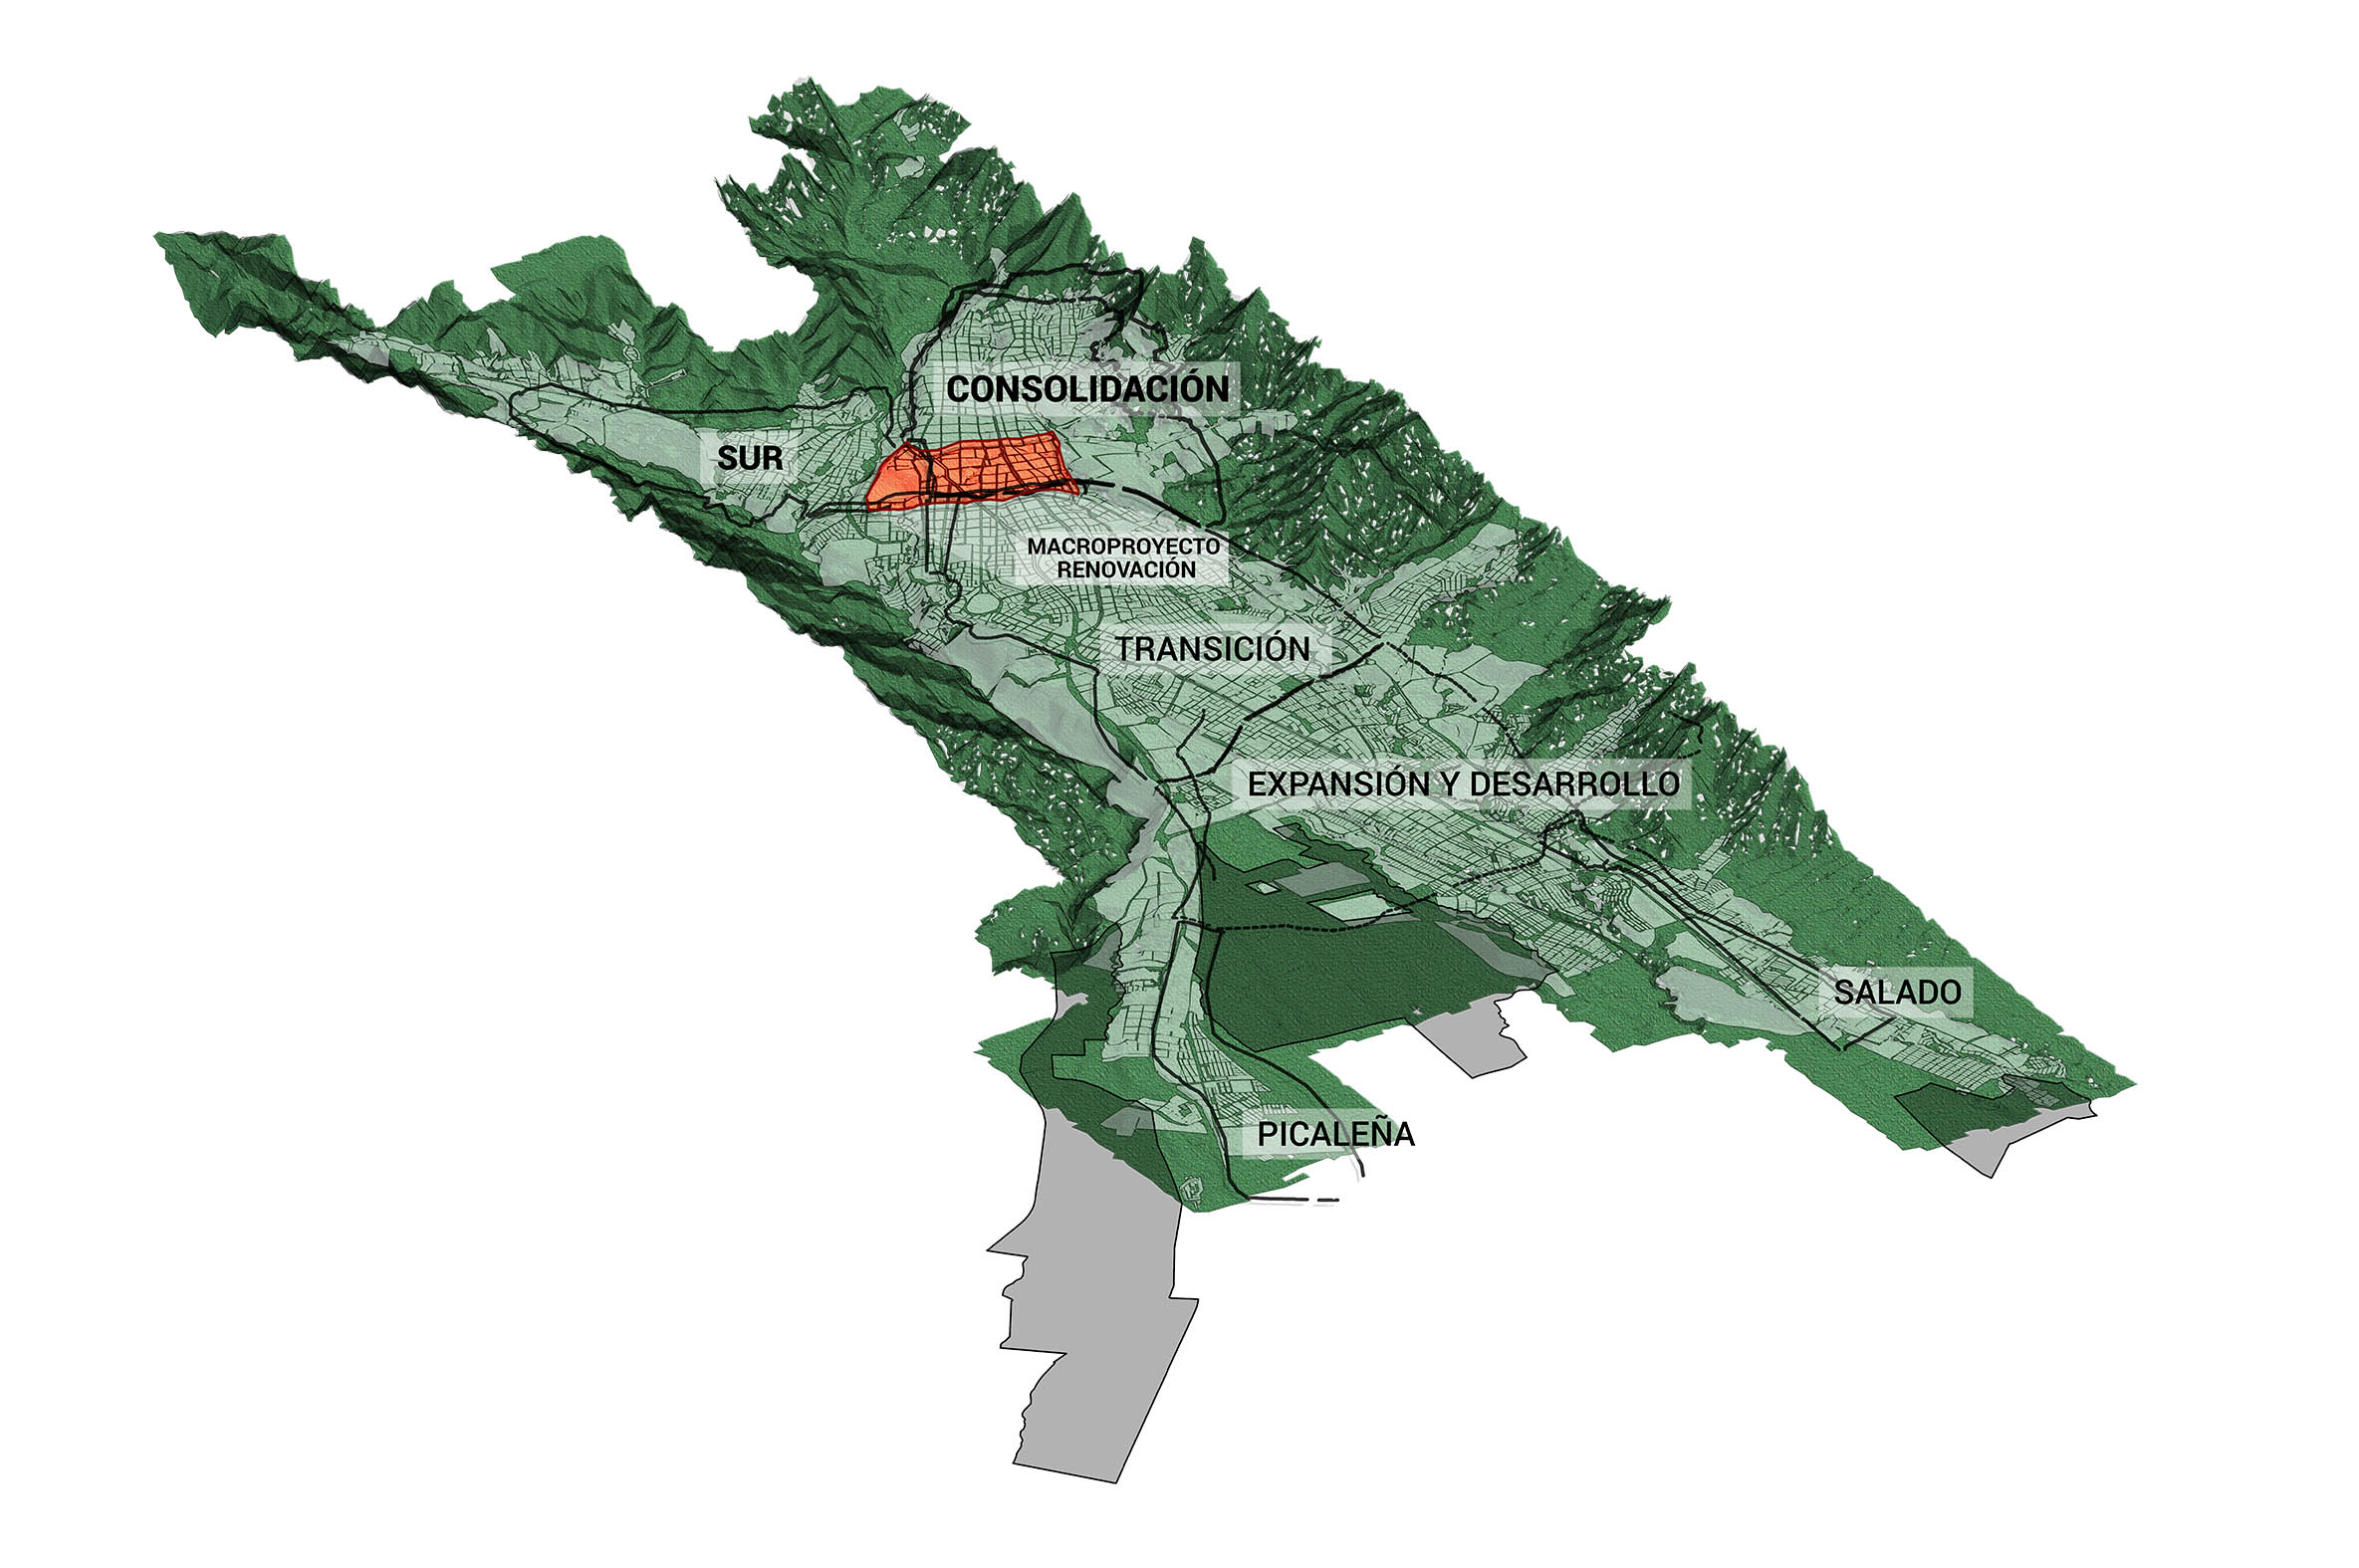 ibague main rings and urban renewal area localization